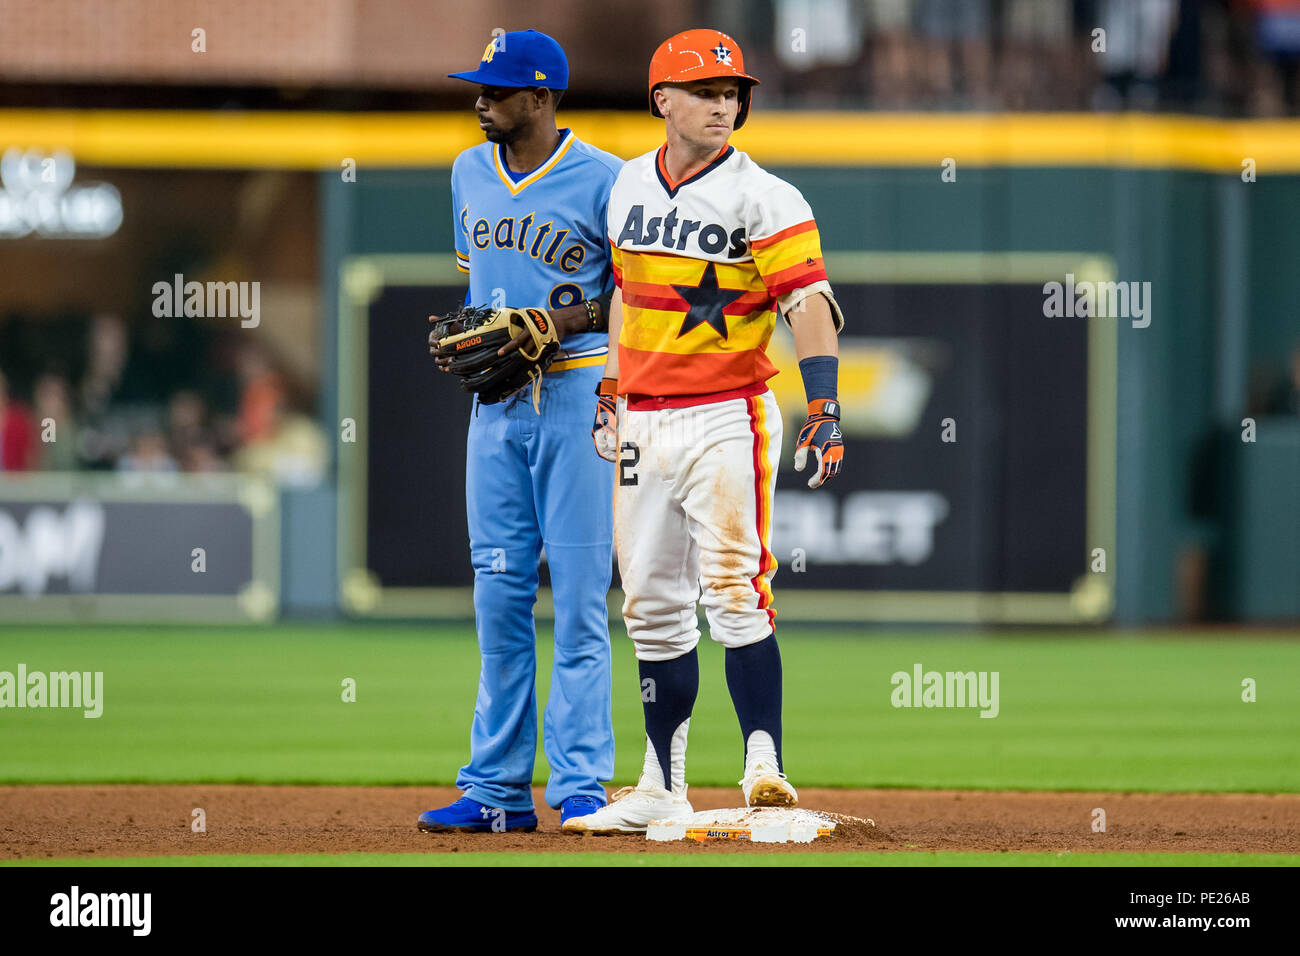 August 10, 2018: Seattle Mariners second baseman Dee Gordon (9) during a  Major League Baseball game between the Houston Astros and the Seattle  Mariners on 1970s night at Minute Maid Park in